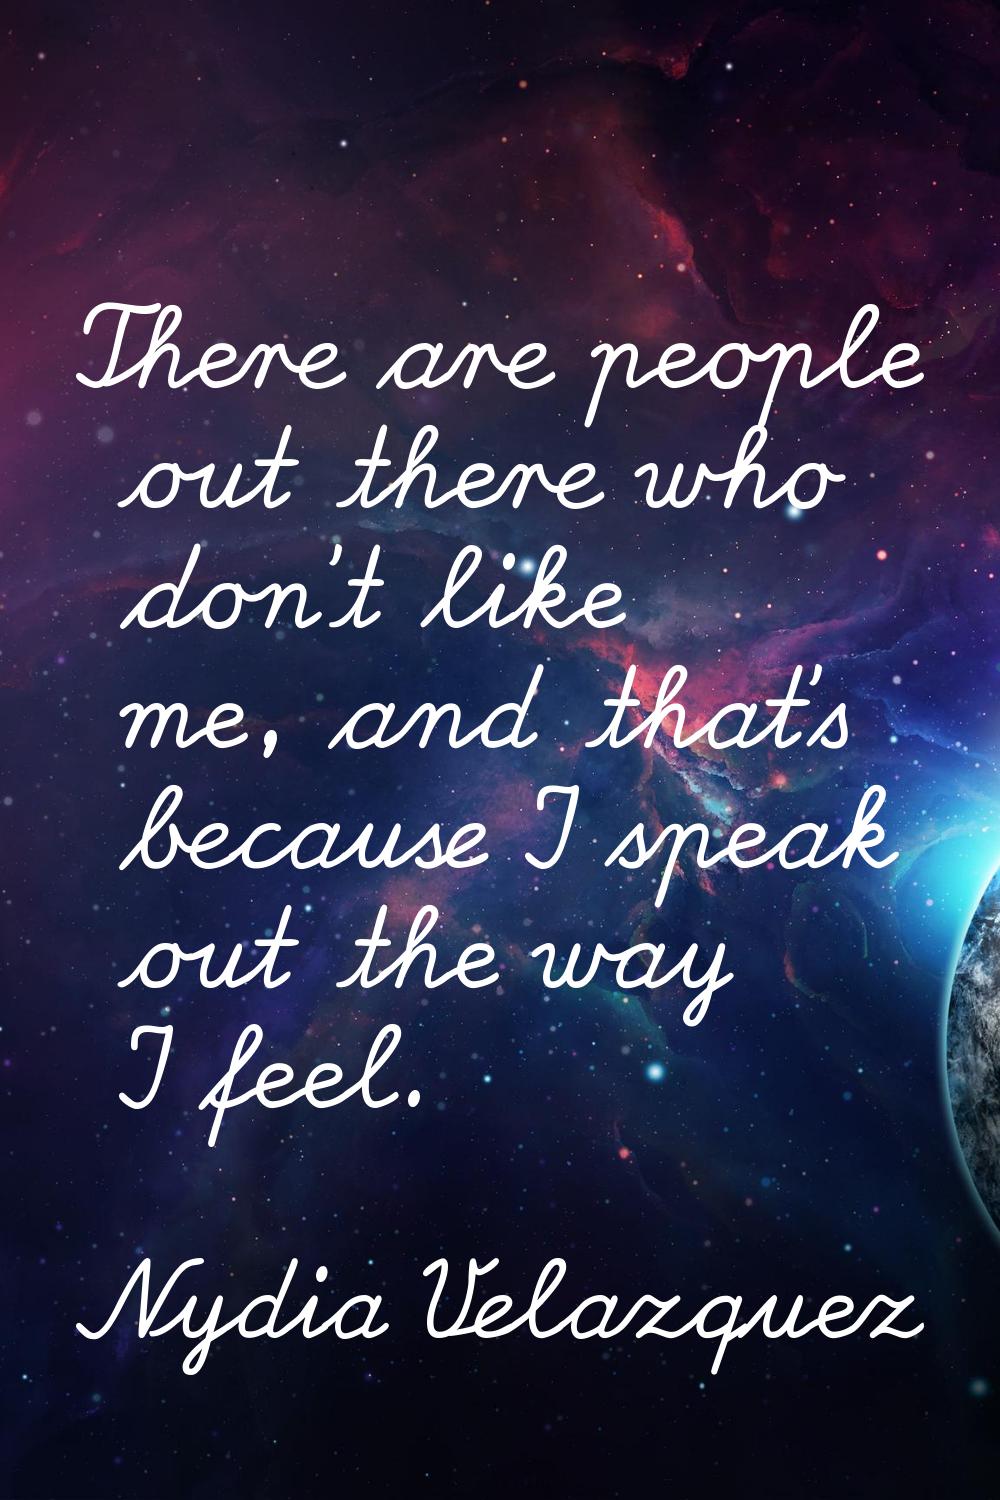 There are people out there who don't like me, and that's because I speak out the way I feel.